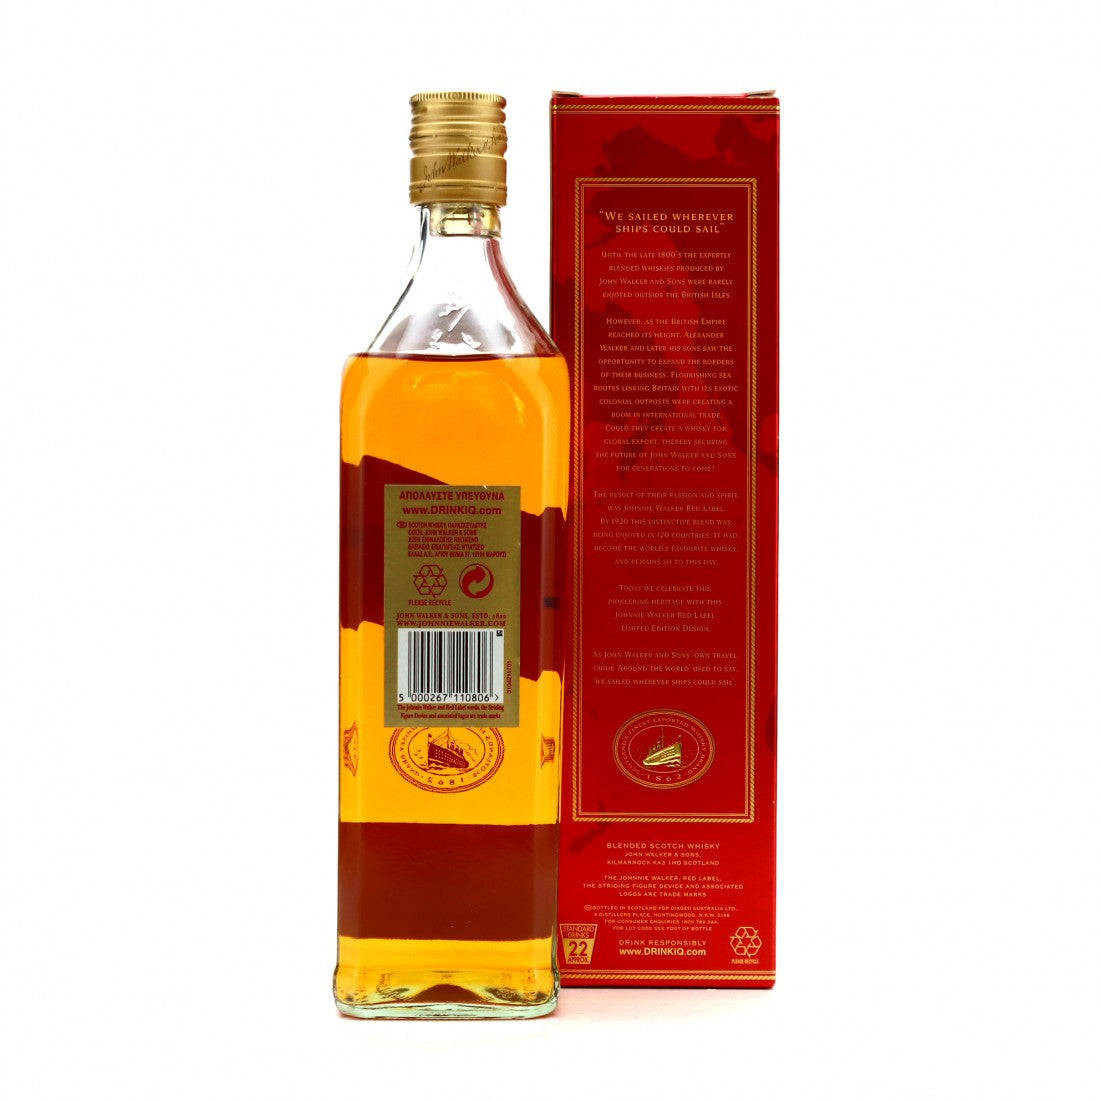 Johnnie Walker Red Label 100th Anniversary Limited Edition Blended Scotch Whisky 700ml